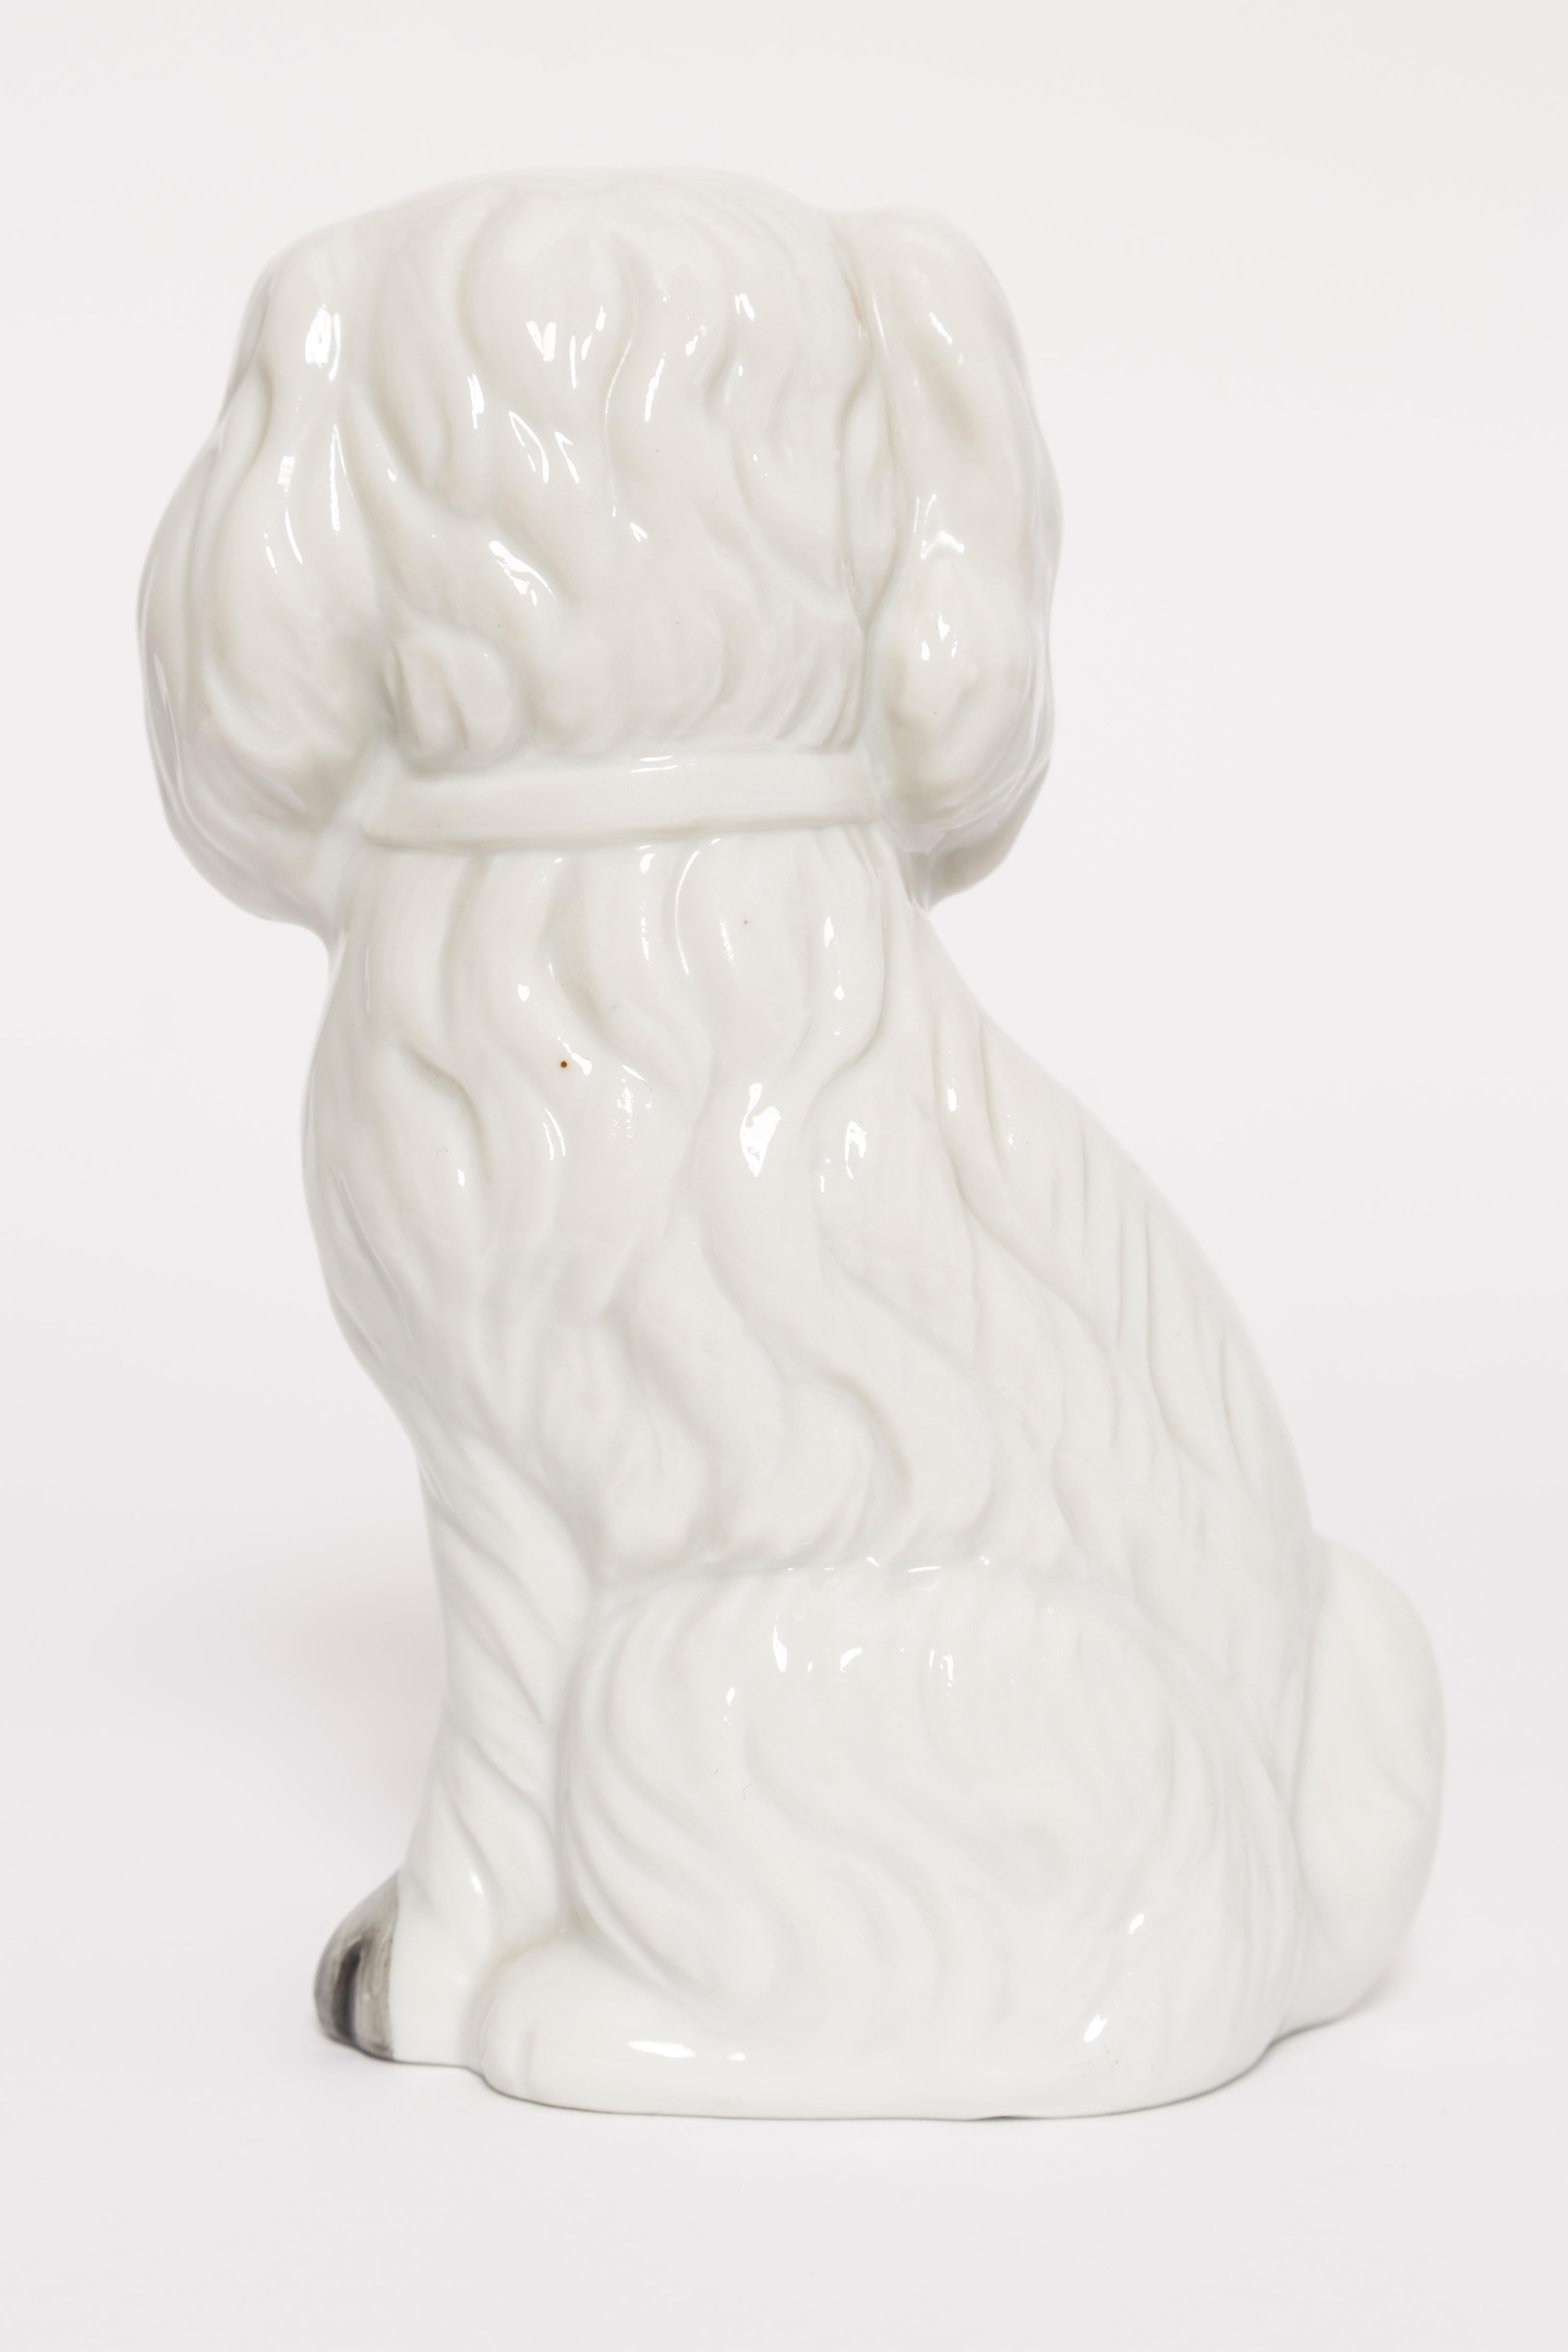 Mid Century Small White Spaniel Dog Sculpture, Italy, 1960s In Good Condition For Sale In 05-080 Hornowek, PL